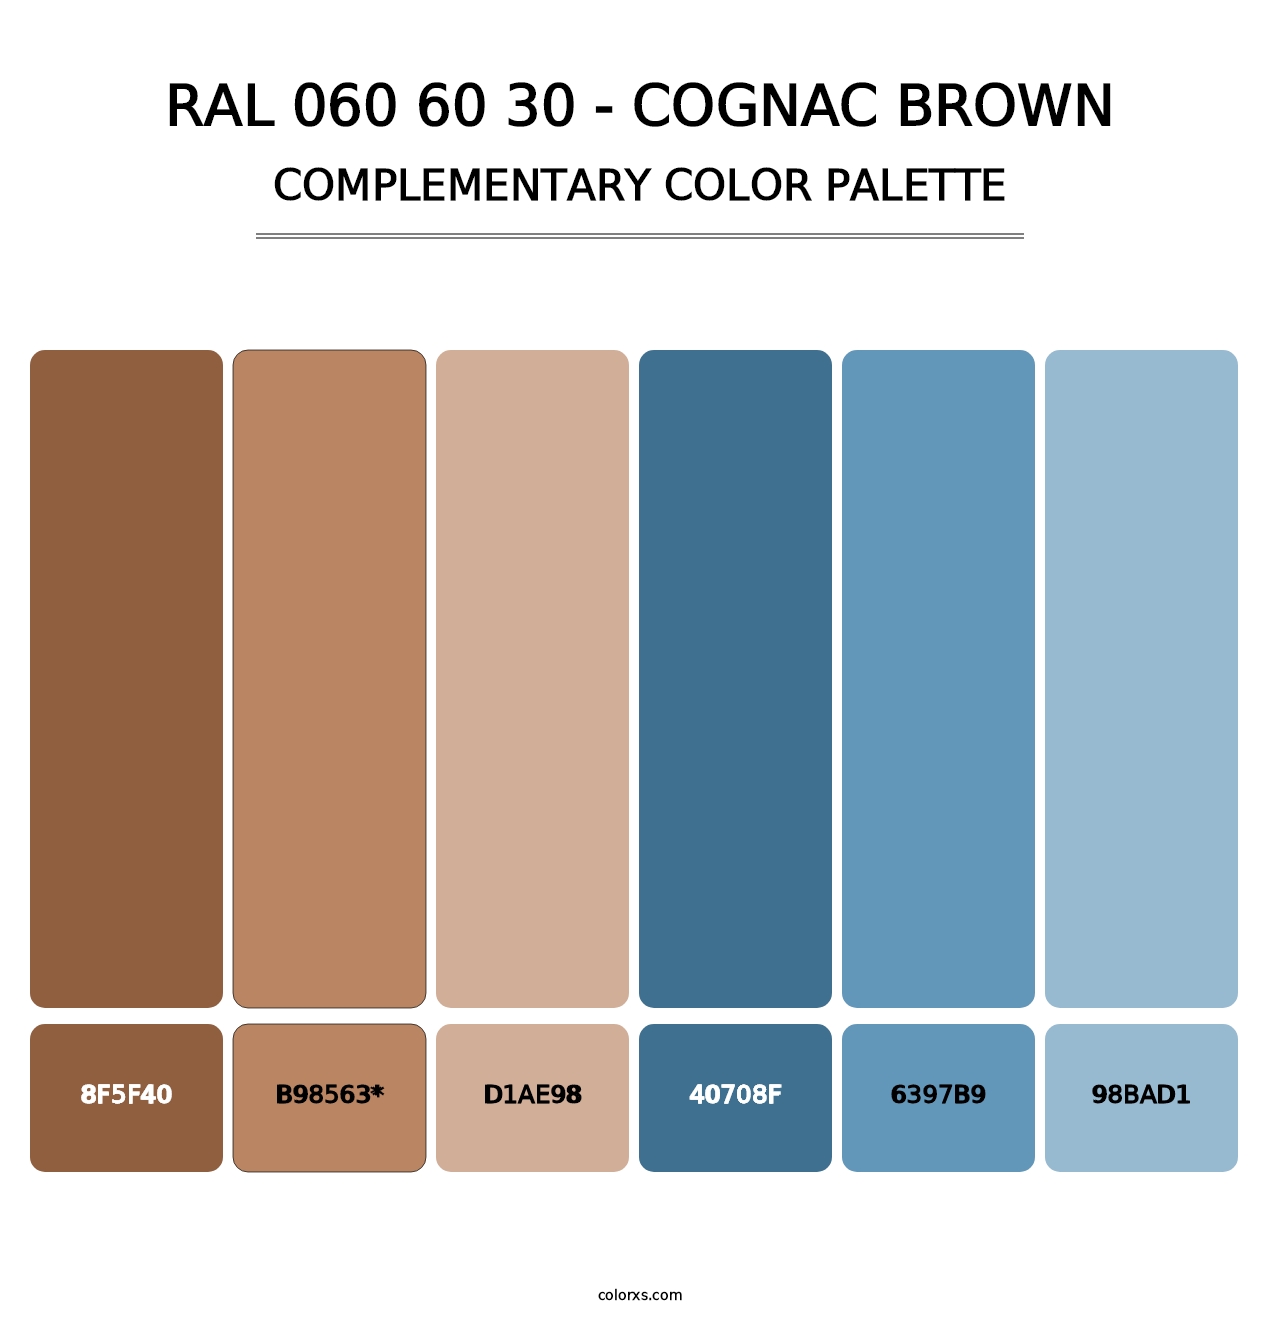 RAL 060 60 30 - Cognac Brown - Complementary Color Palette